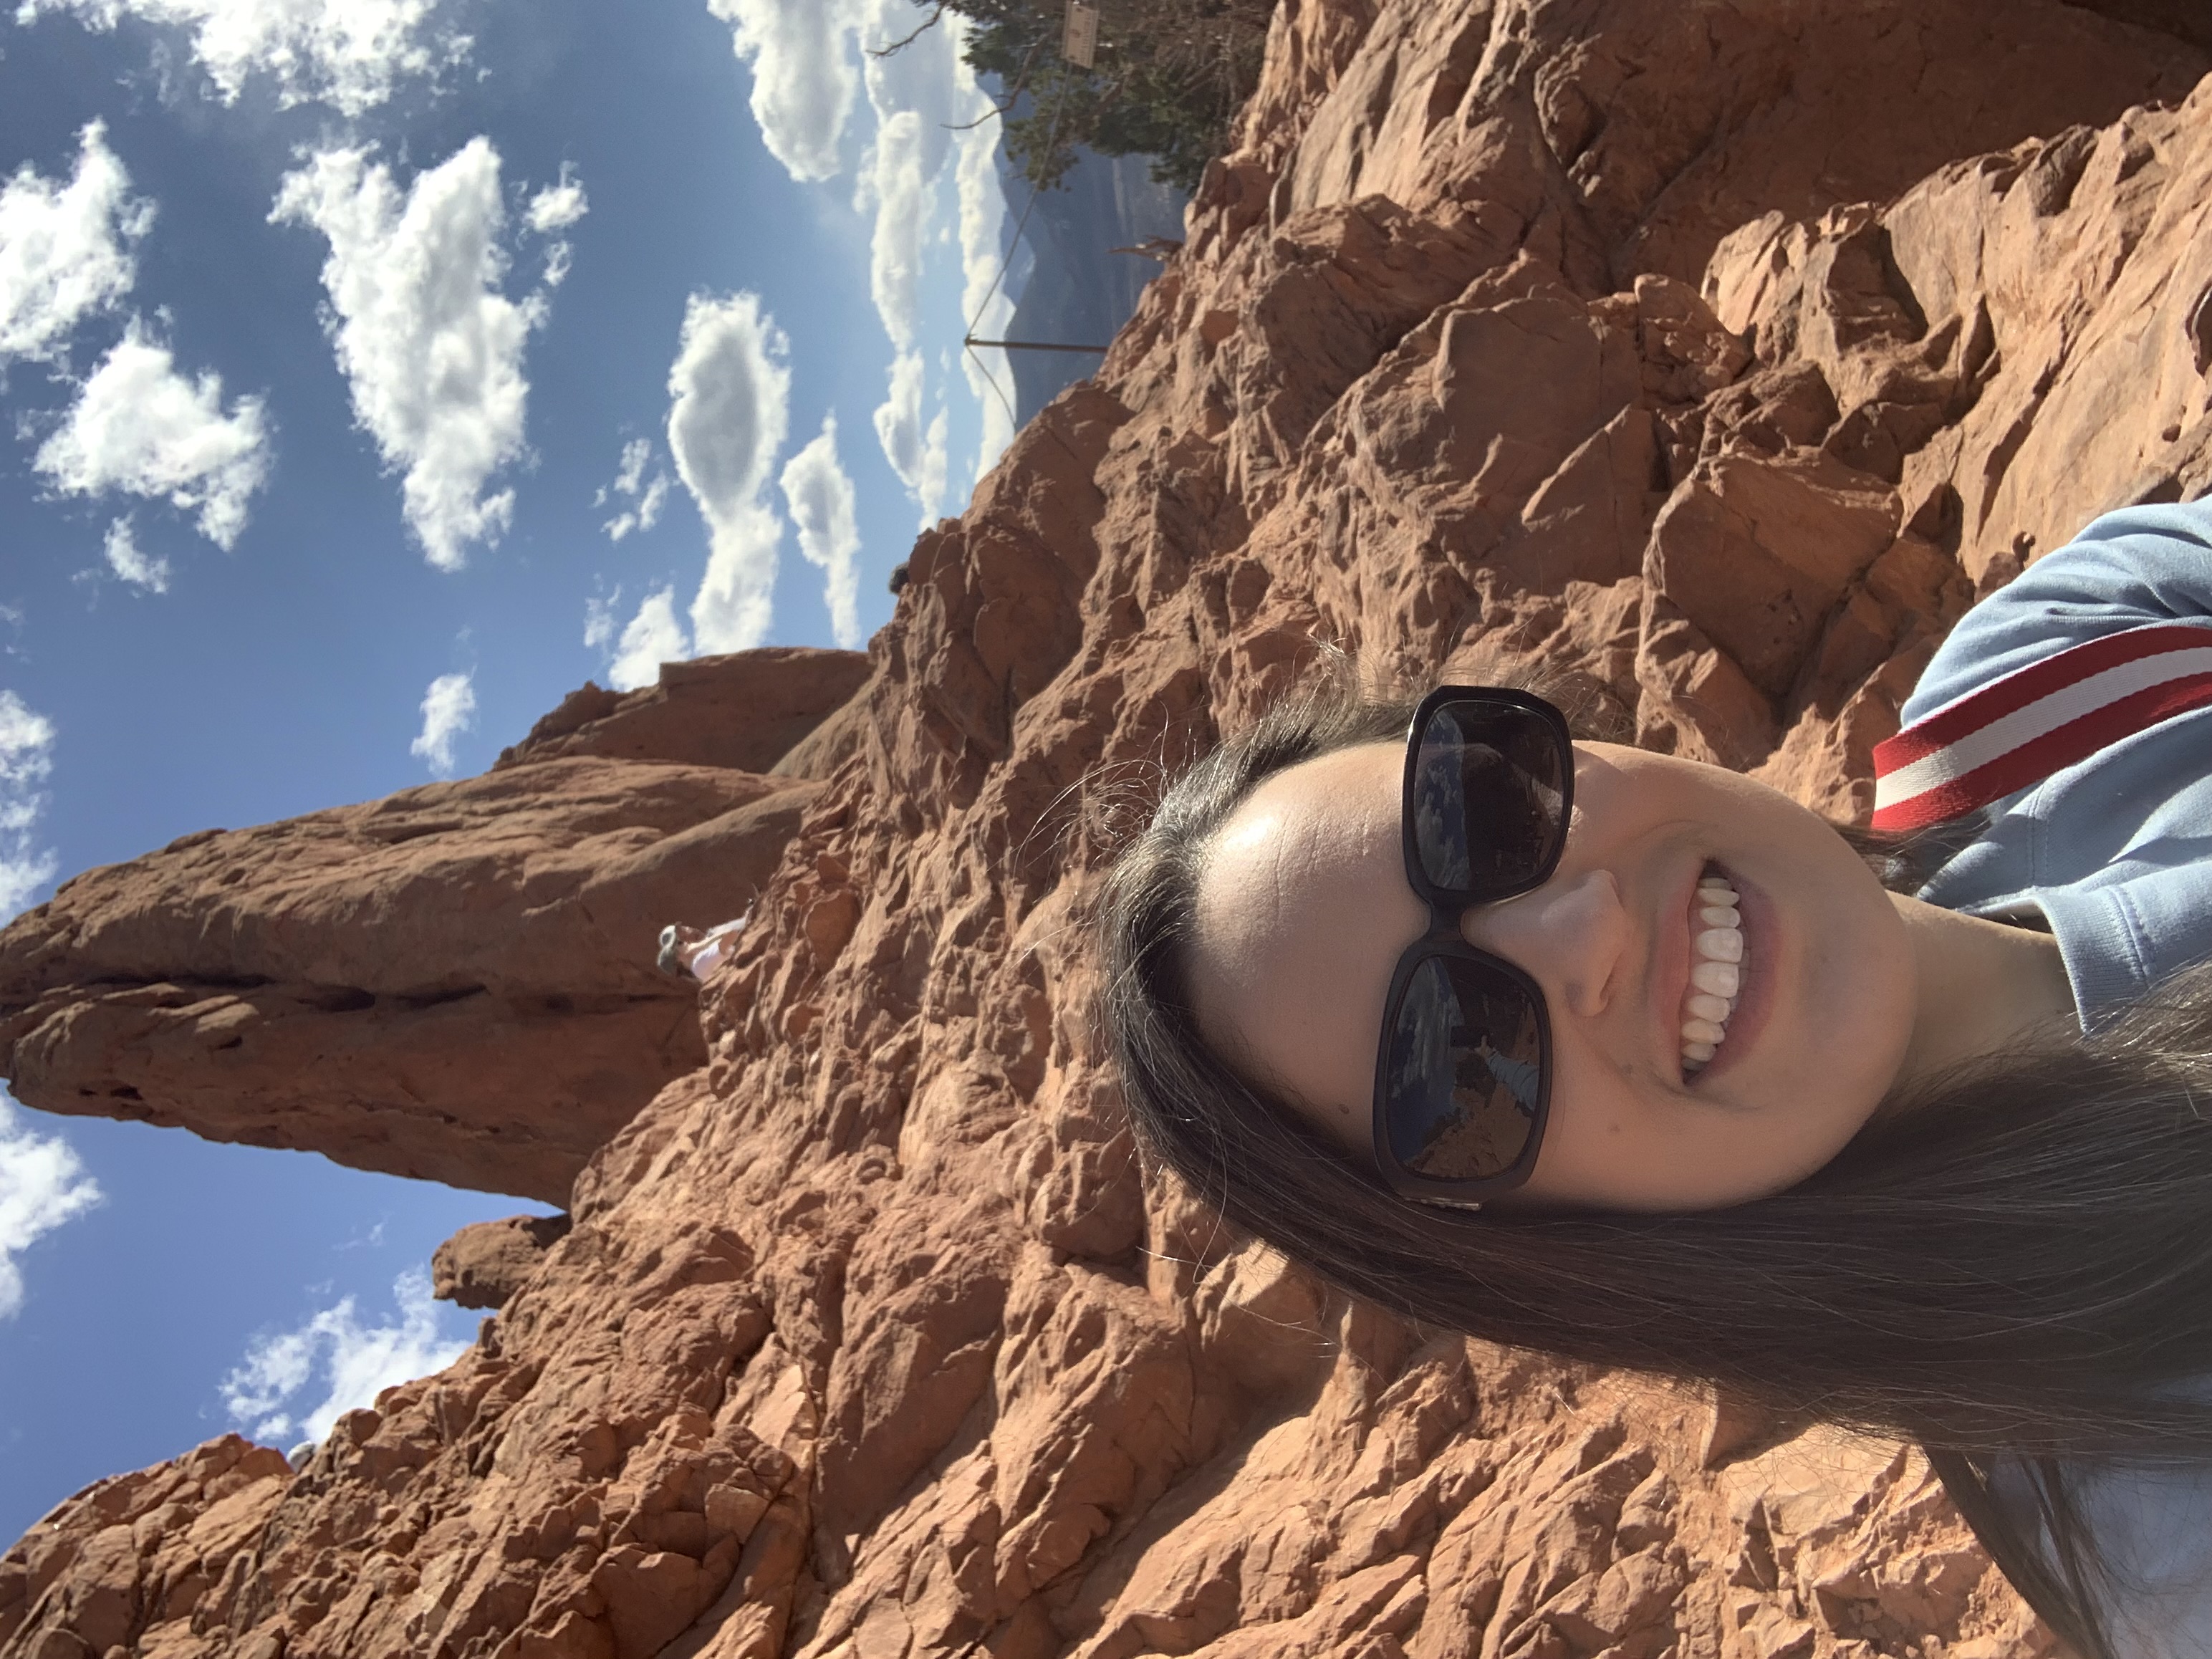 Caitlin in front of a reddish, rocky landscape